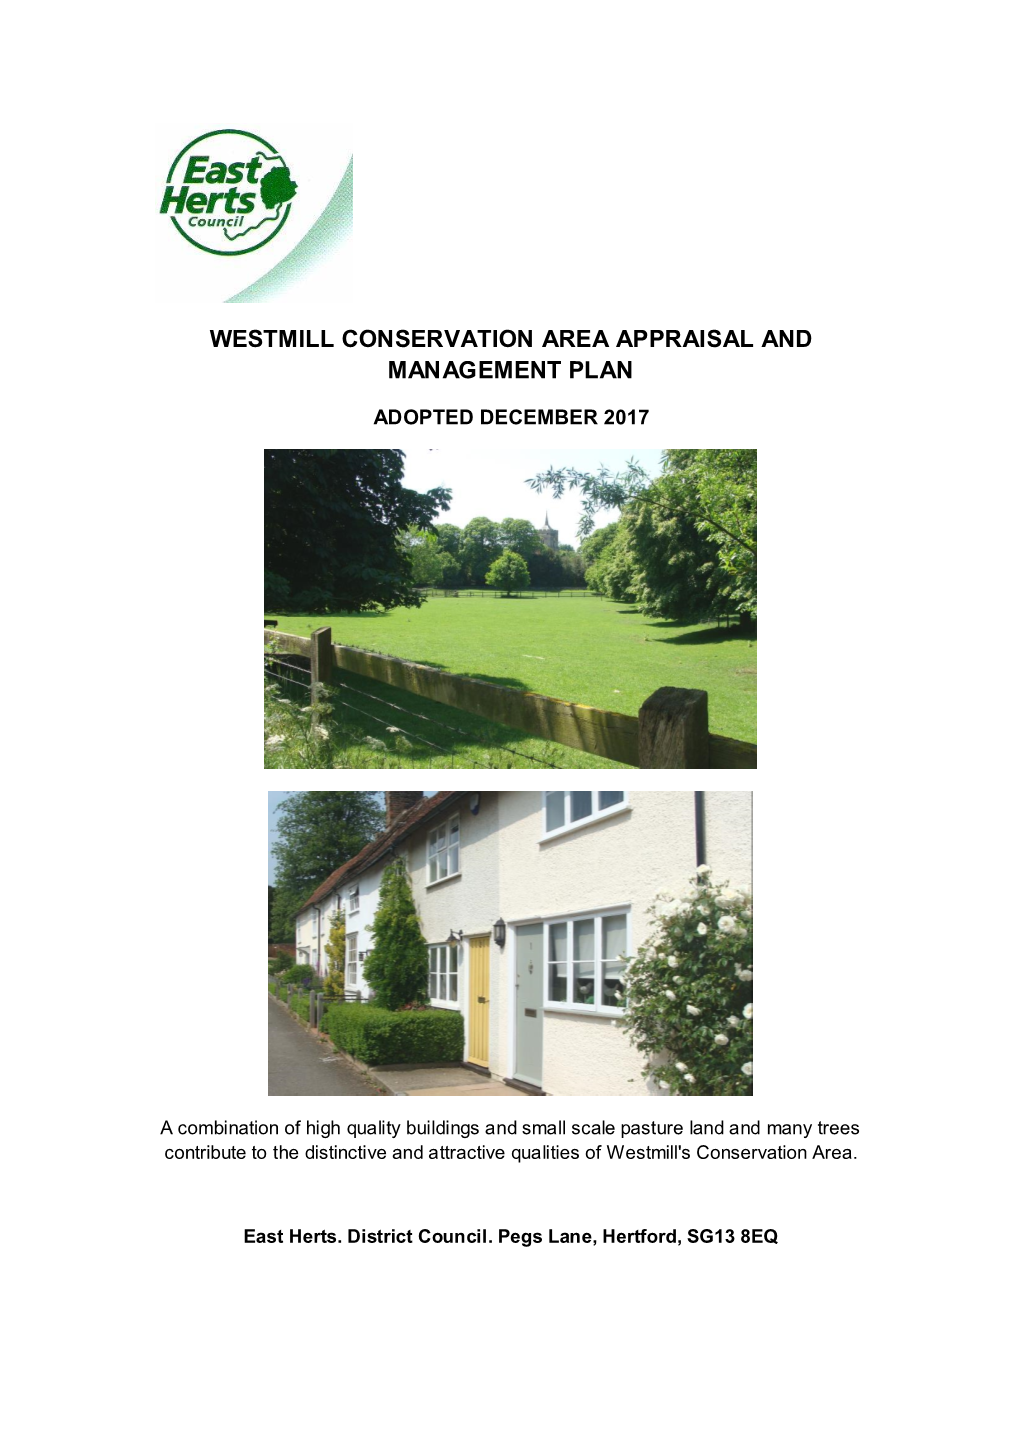 Westmill Conservation Area Appraisal and Management Plan